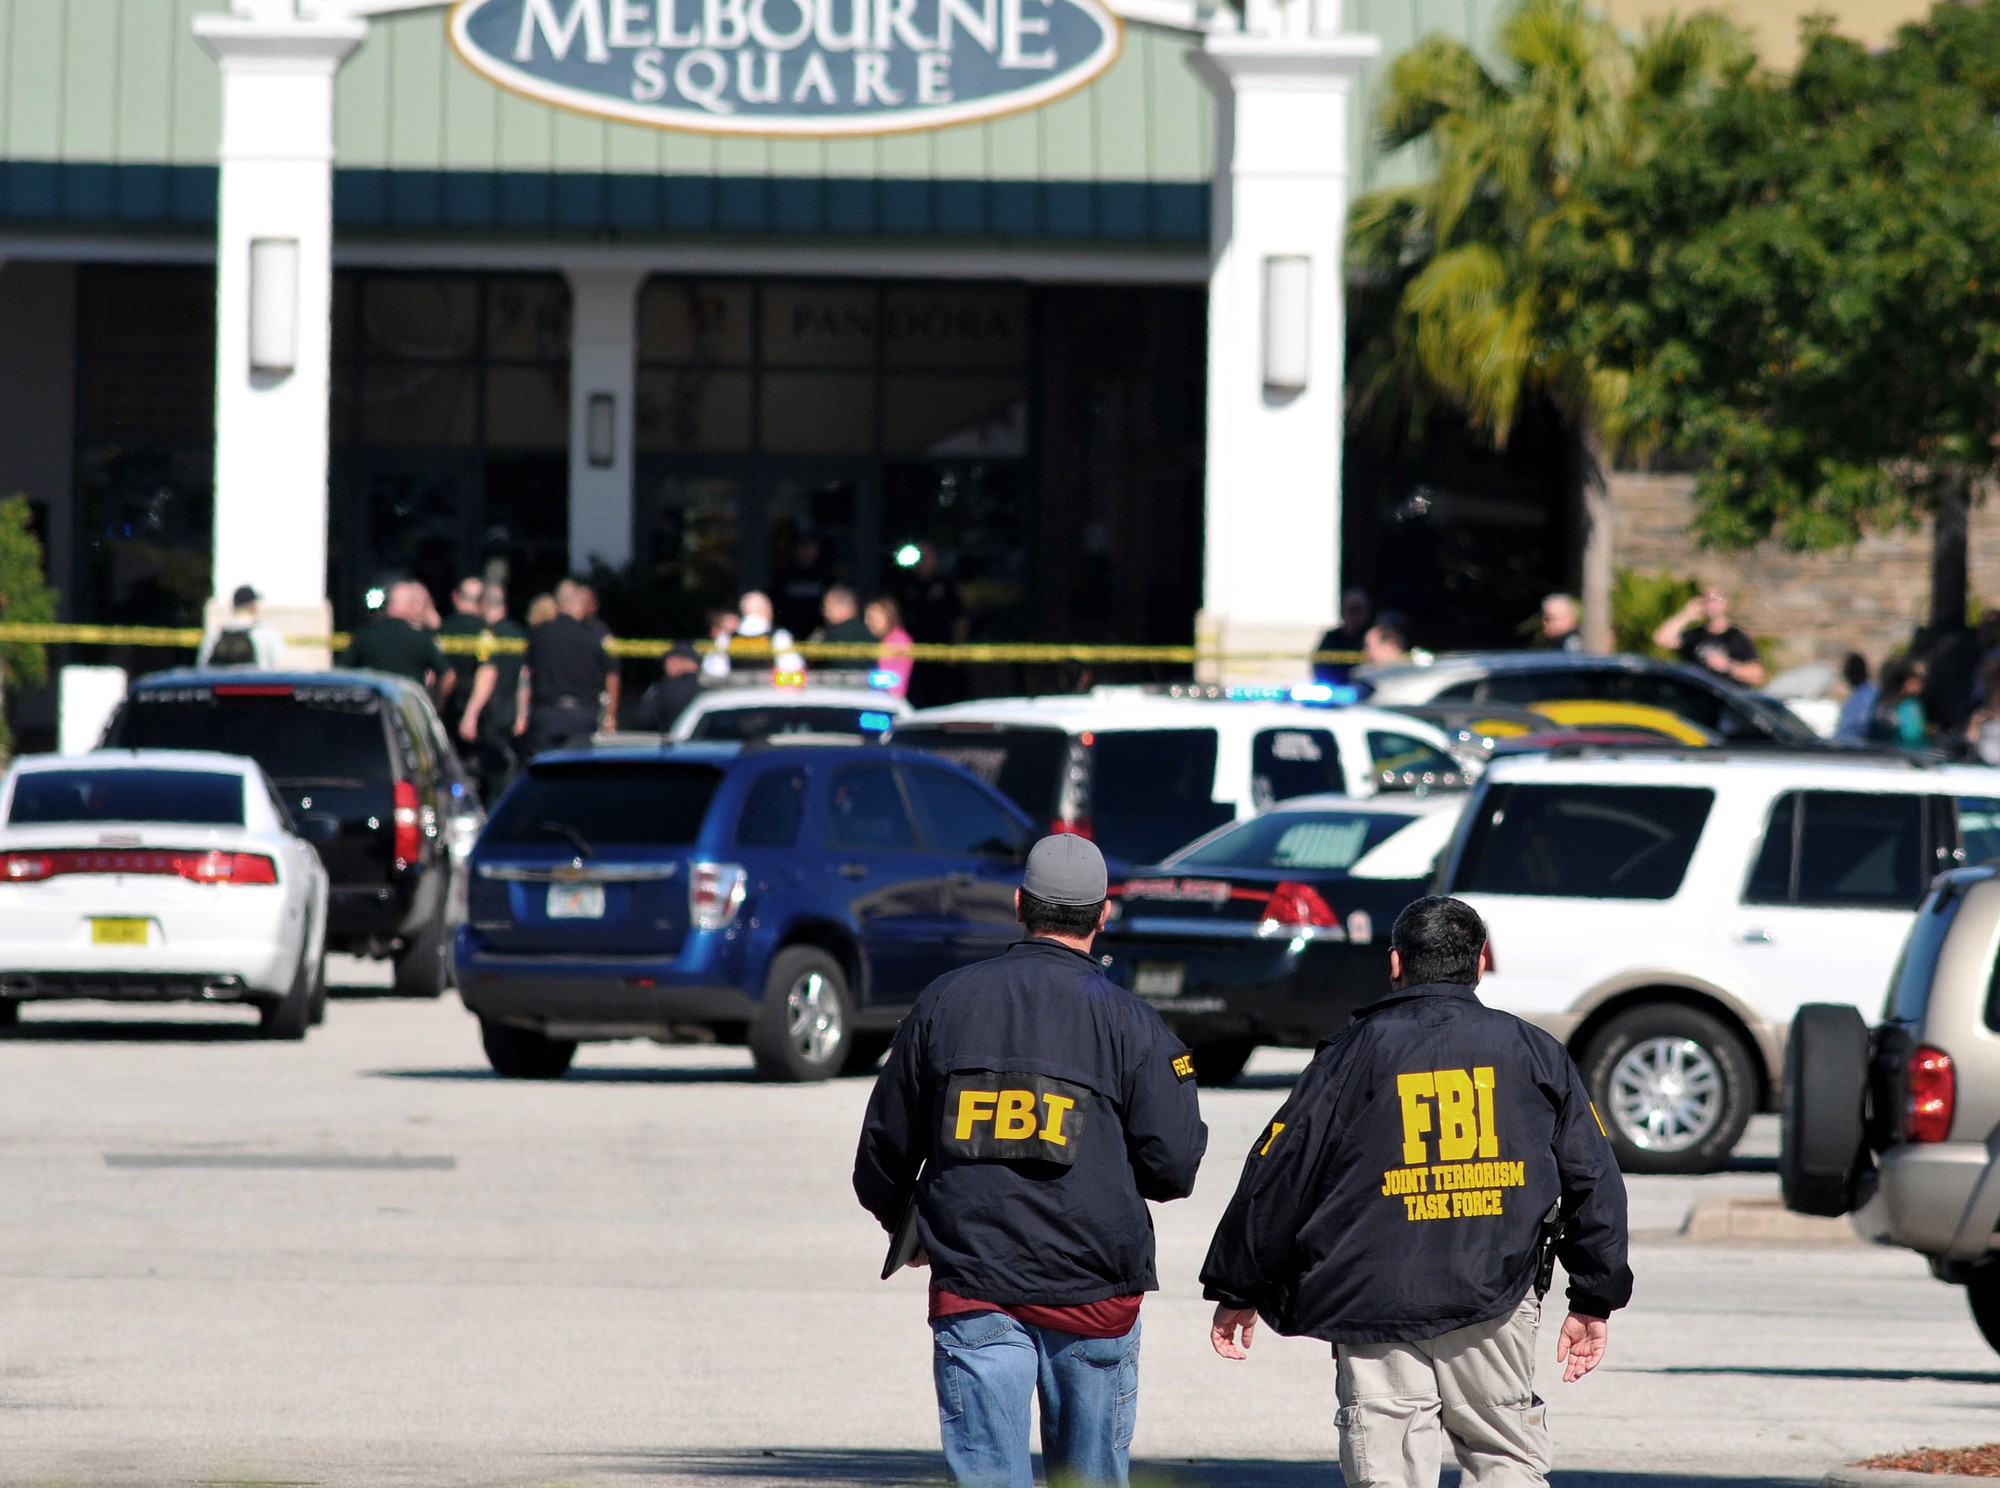 Law enforcement including the FBI respond to the scene of a shooting at the Melbourne Square Mall on Saturday, in Melbourne, Fla. Melbourne Police have confirmed that the shooting Saturday morning at the mall has left two people dead and one injured from a gunshot wound. Police say the injured victim is hospitalized in stable condition and cooperating with investigators. After responding to reports around 9:30 a.m.